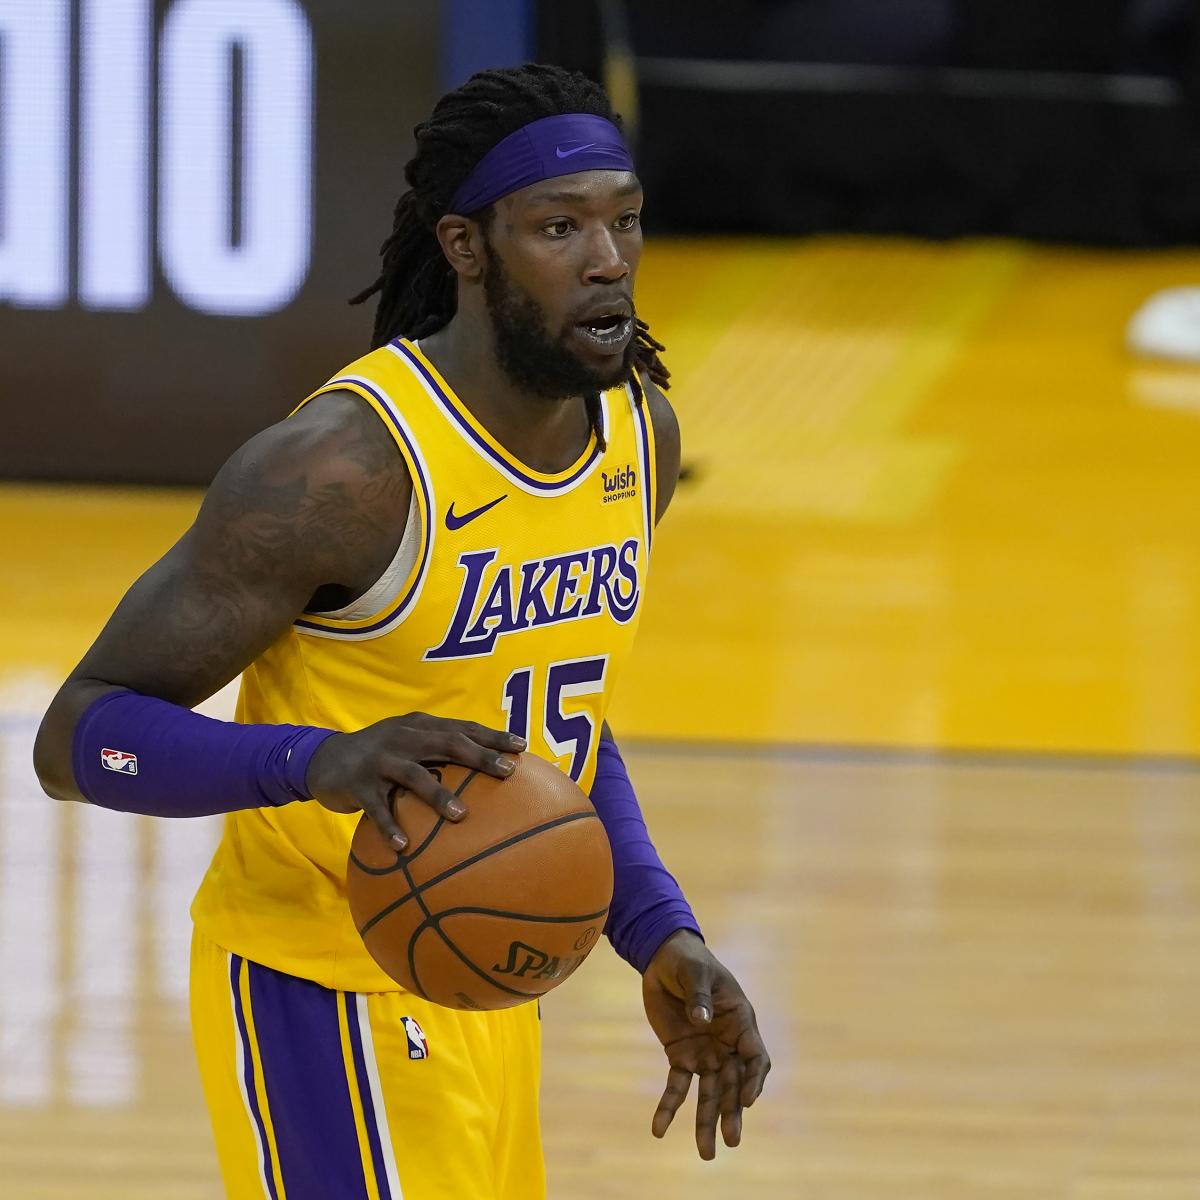 Wizards Trade Partners for a Montrezl Harrell Deal